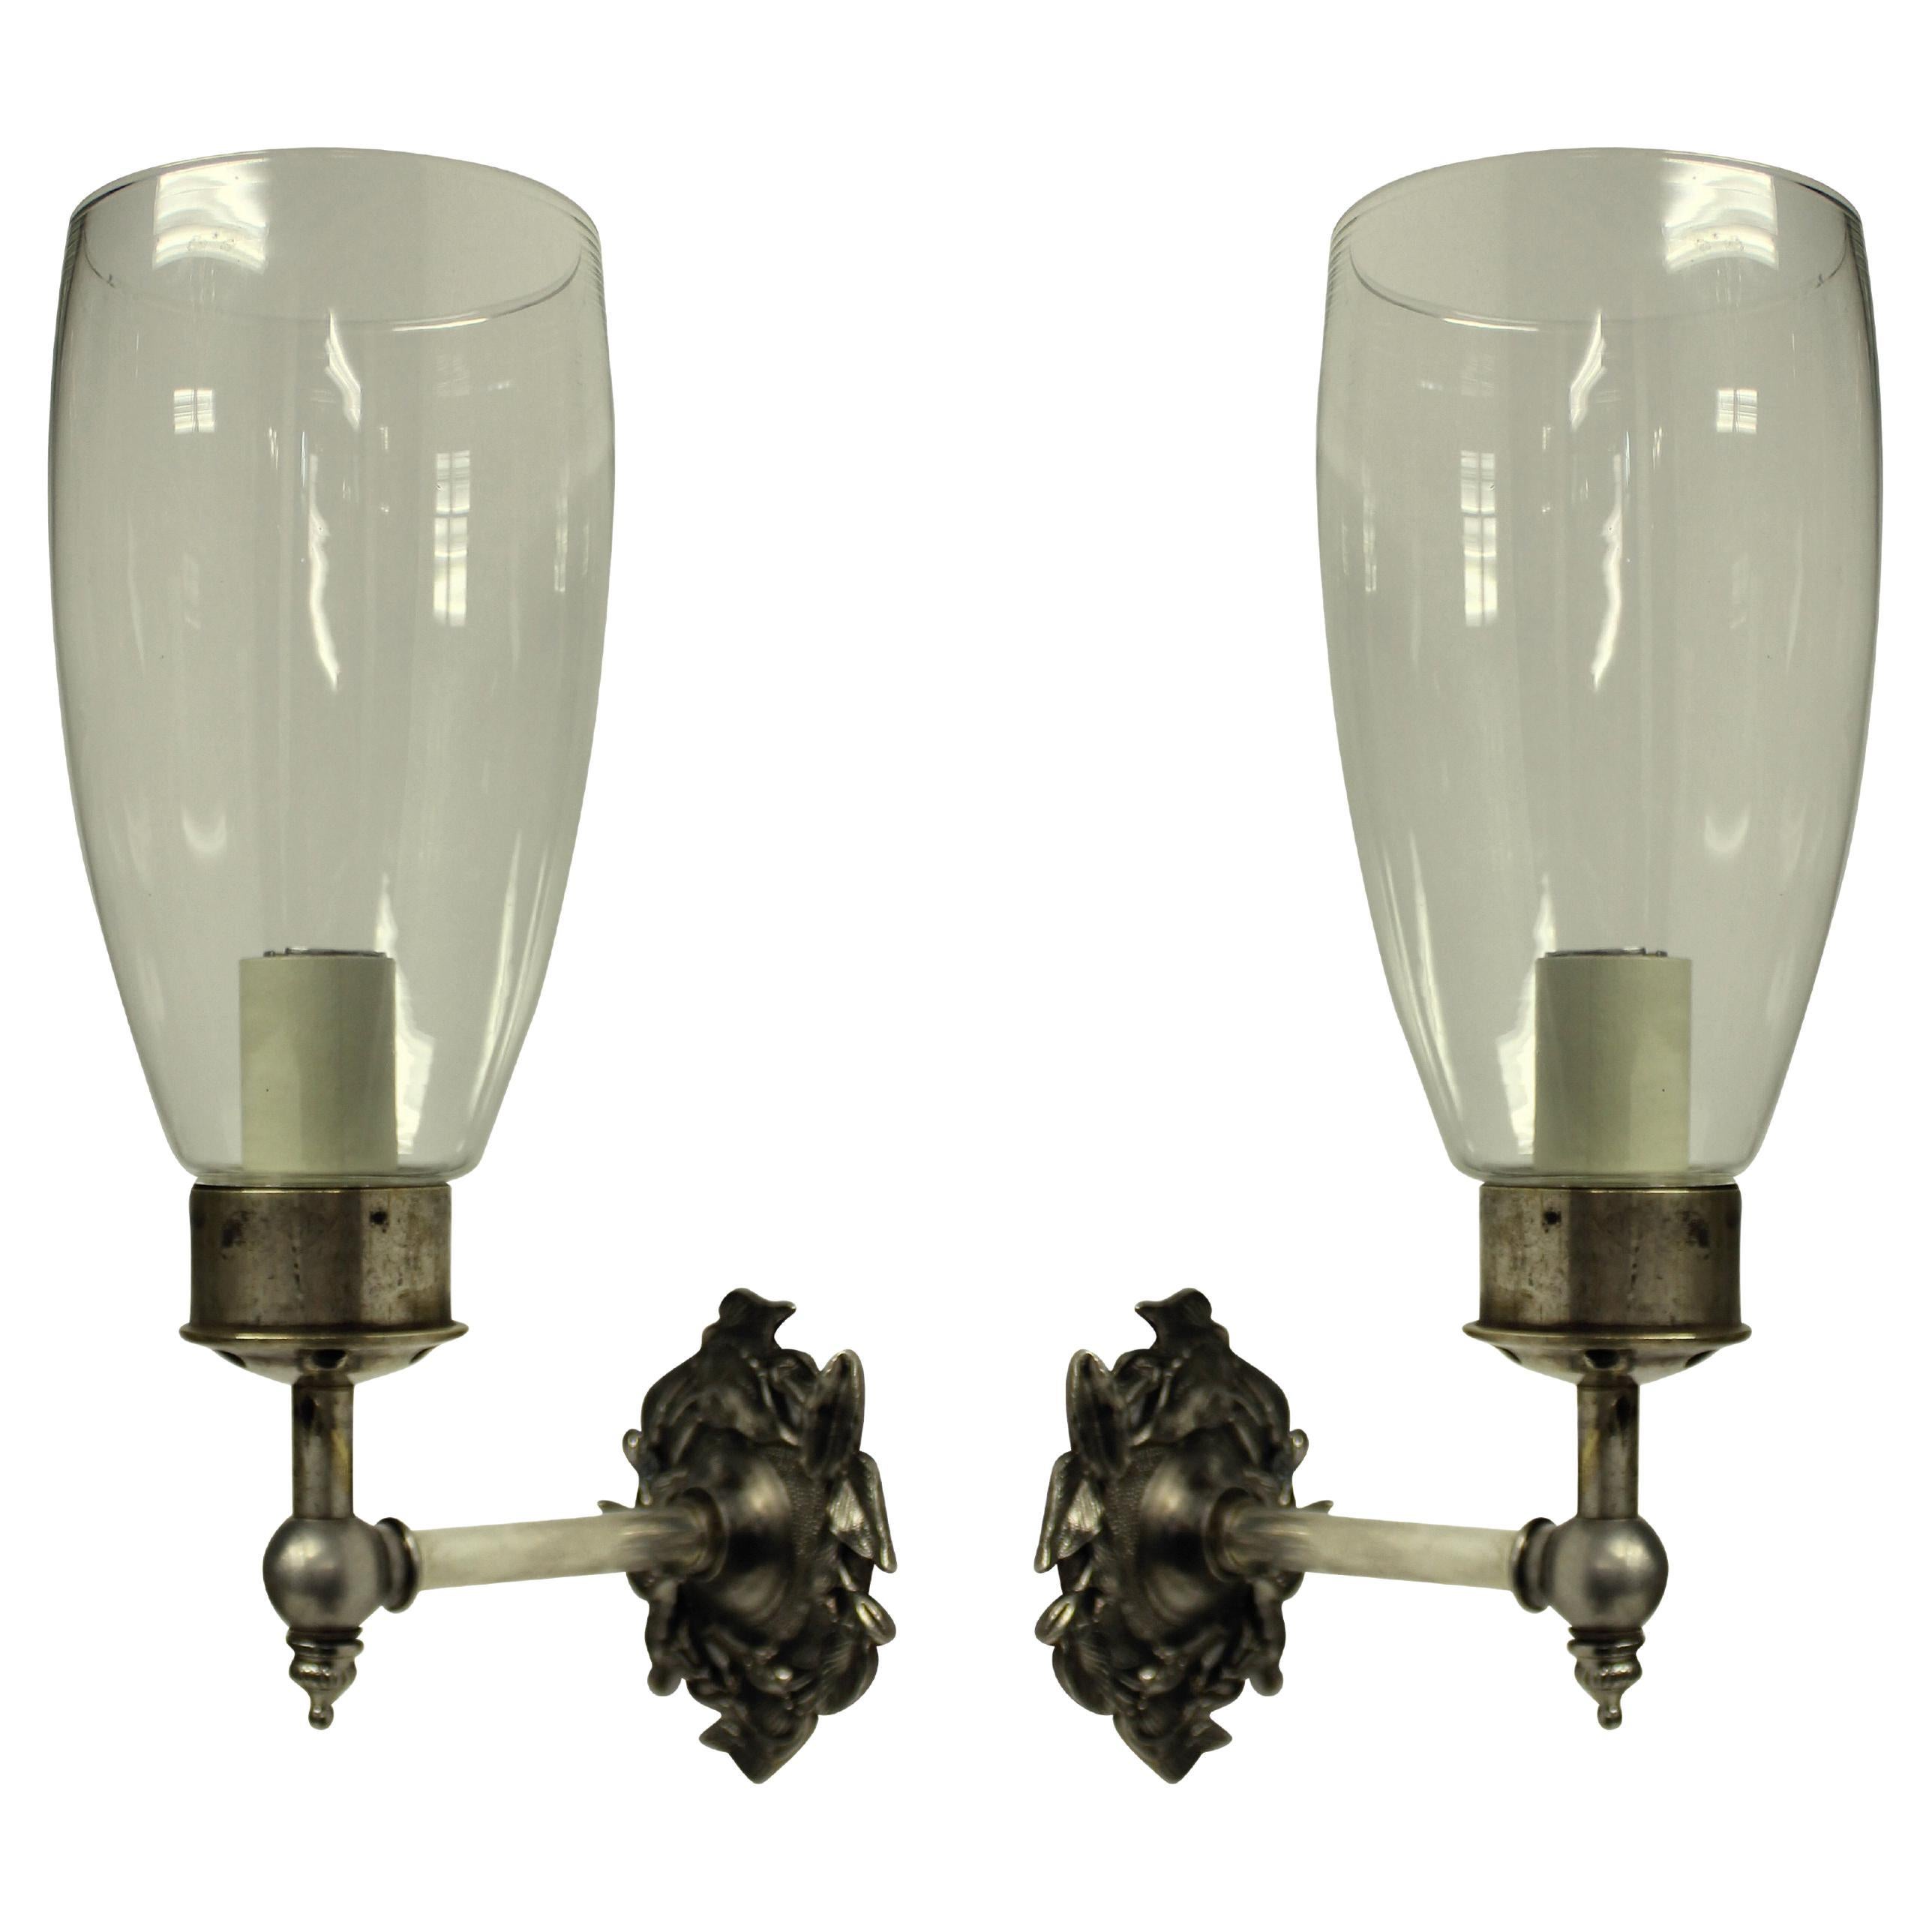 Pair of Single Arm Wall Sconces with Storm Shades